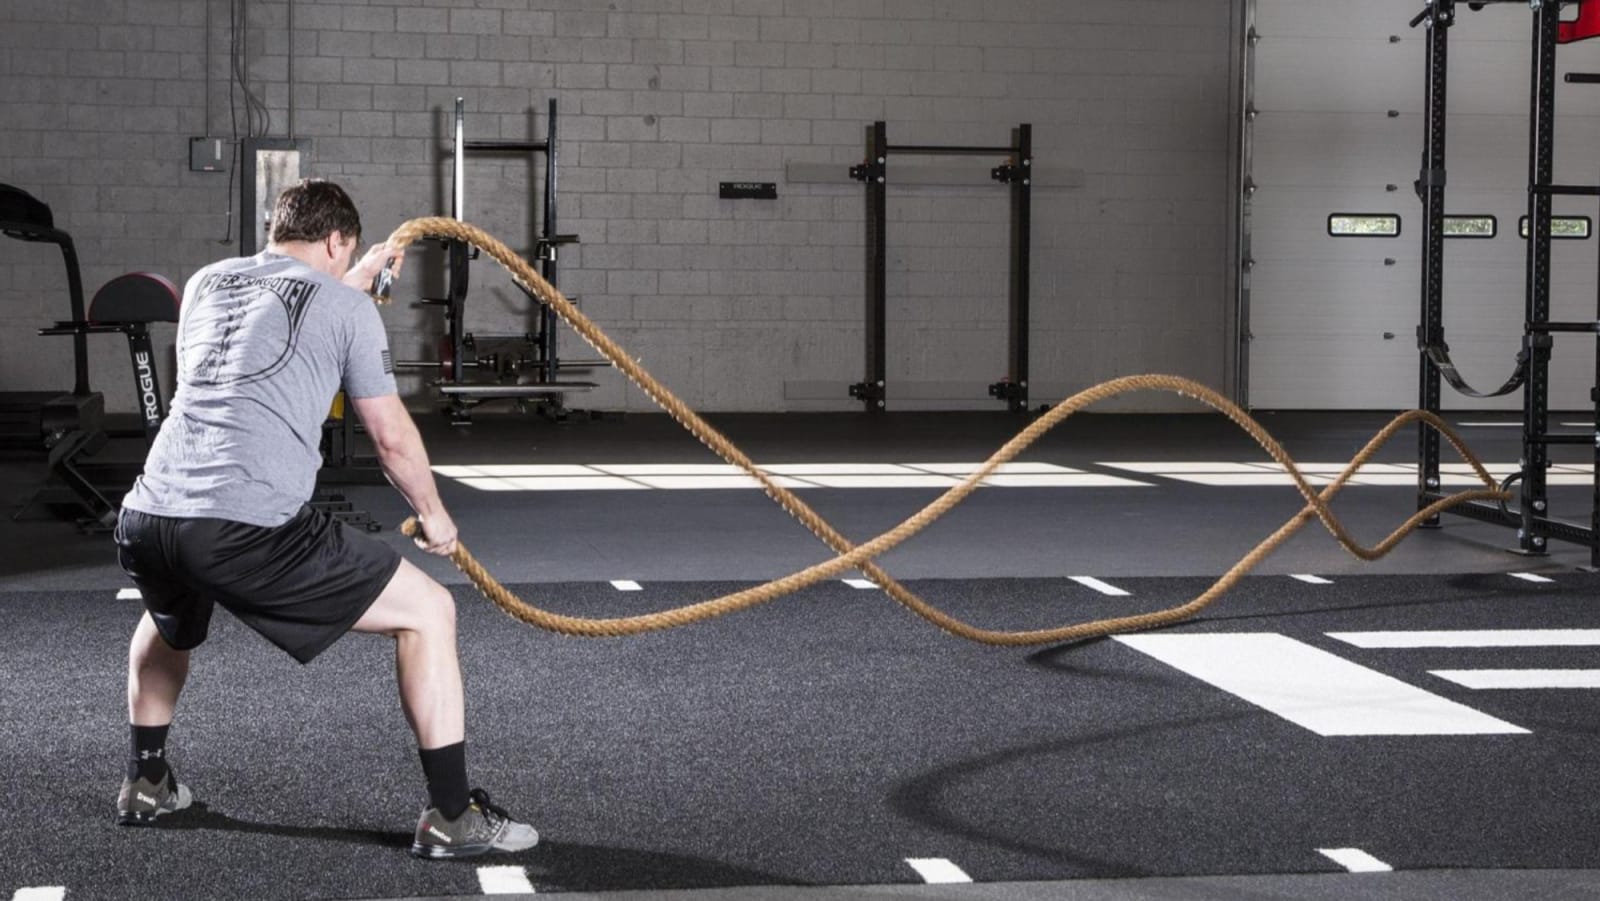 https://assets.roguefitness.com/f_auto,q_auto,c_limit,w_1600,b_rgb:ffffff/catalog/Bodyweight%20and%20Gymnastics/Ropes/Conditioning%20Ropes/KRP50/KRP50-web1_vkw1gv.png